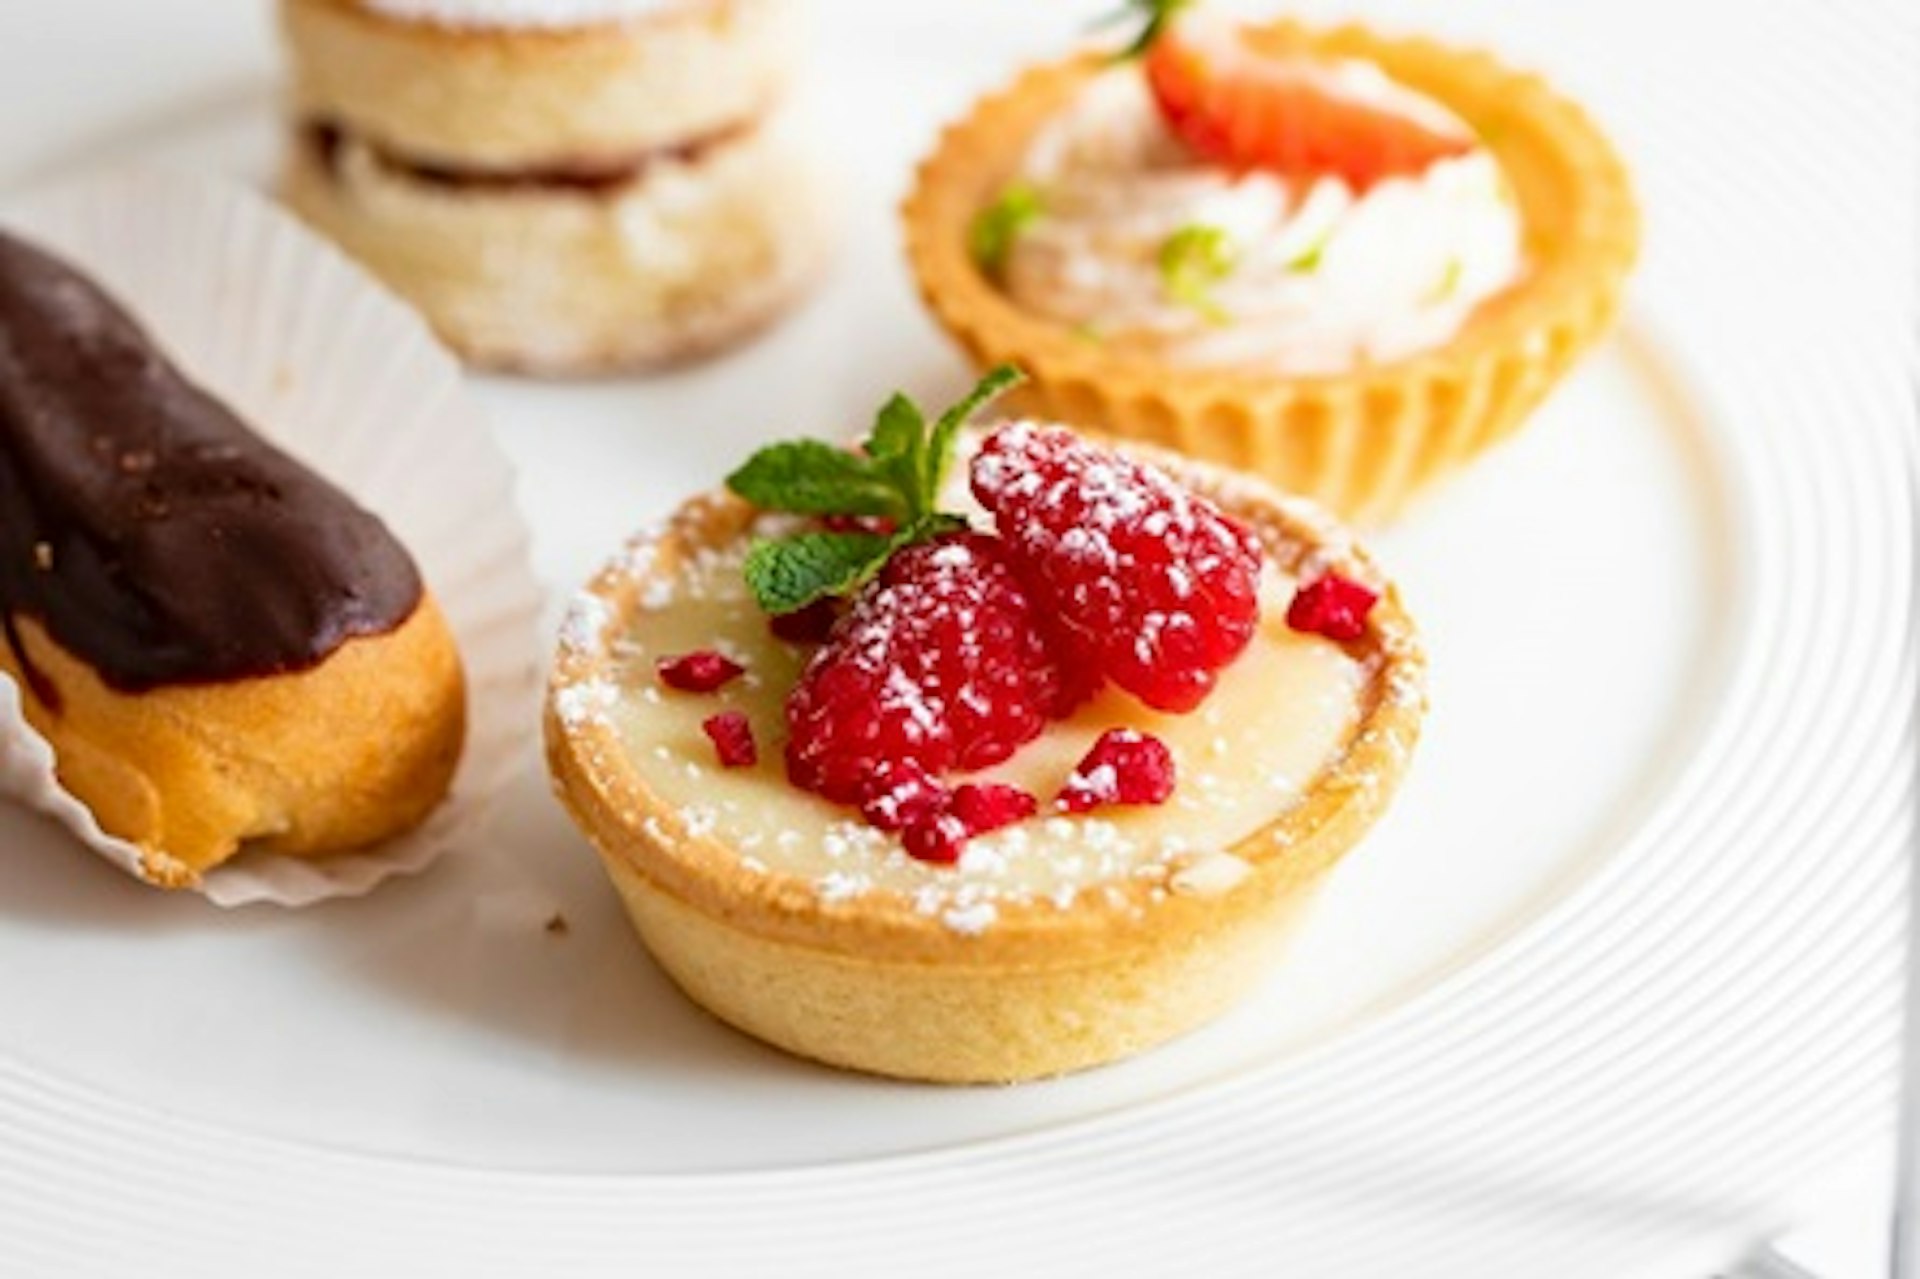 Bottomless Prosecco Afternoon Tea for Two at Mayfair Lounge & Grill at The Cavendish London 3